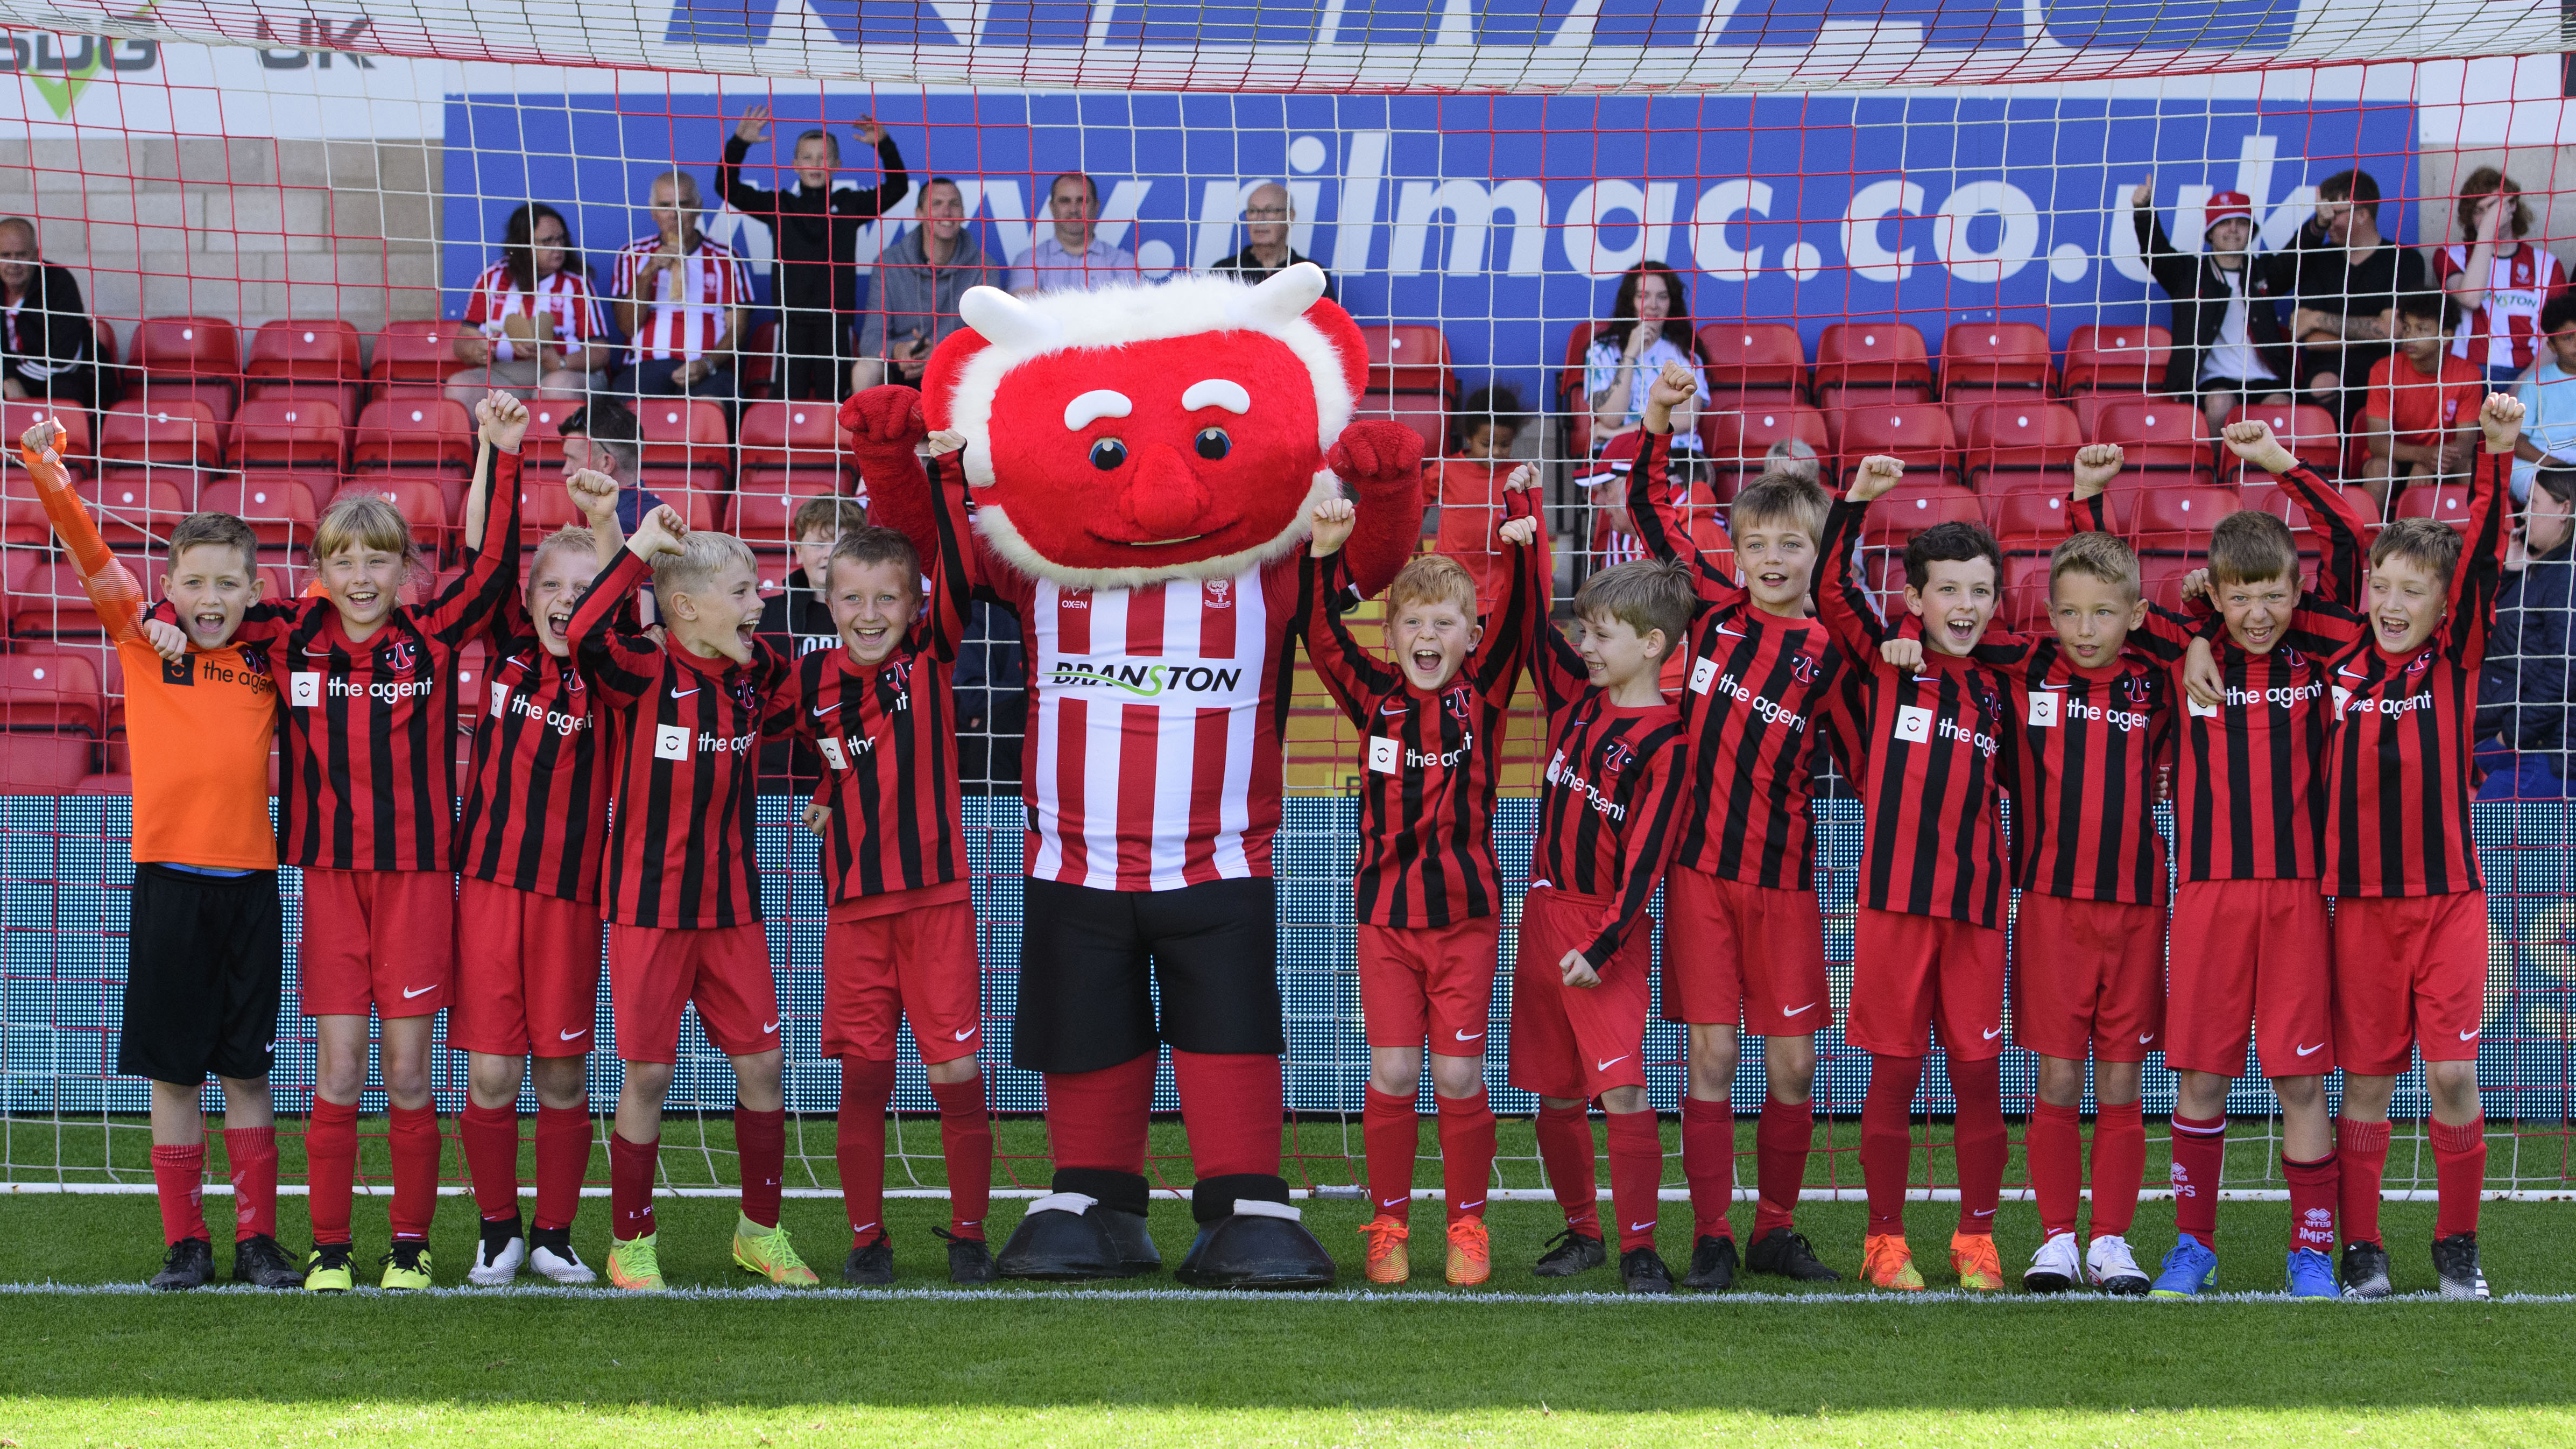 Poacher the Imp poses with a group of children who took part in a penalty shootout against him.